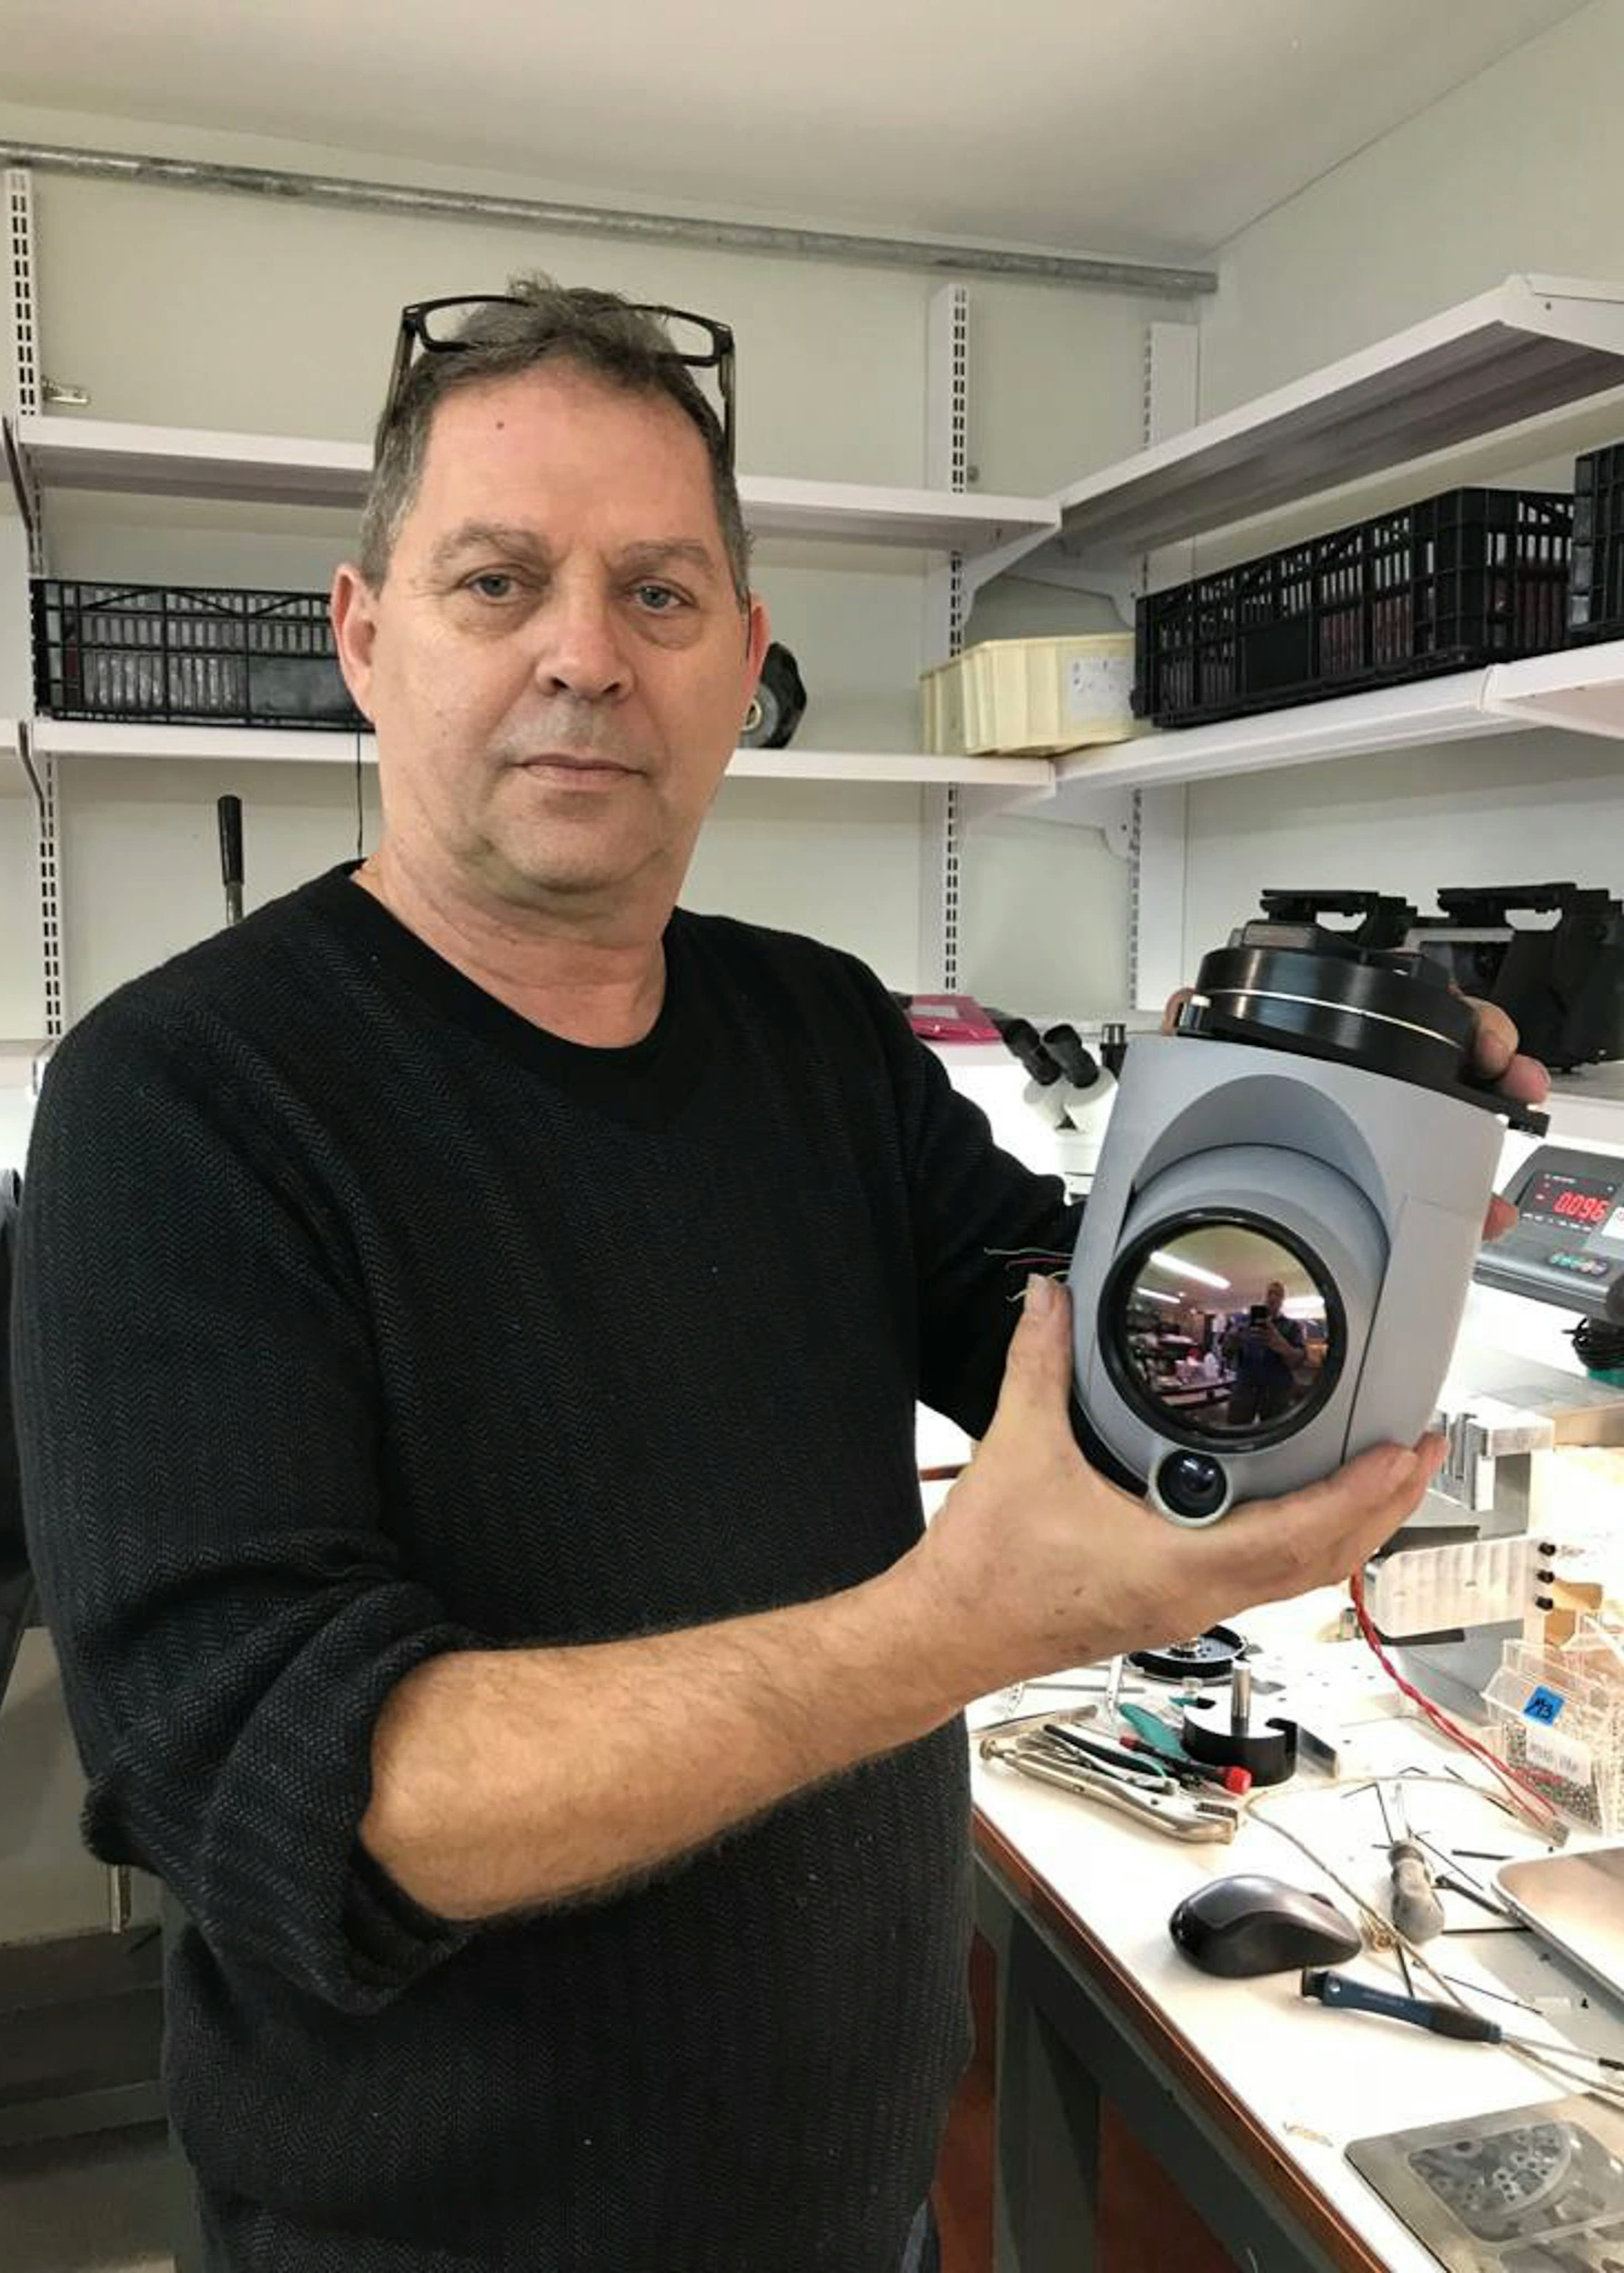 Sherwin (co-founder) holding a gimbal